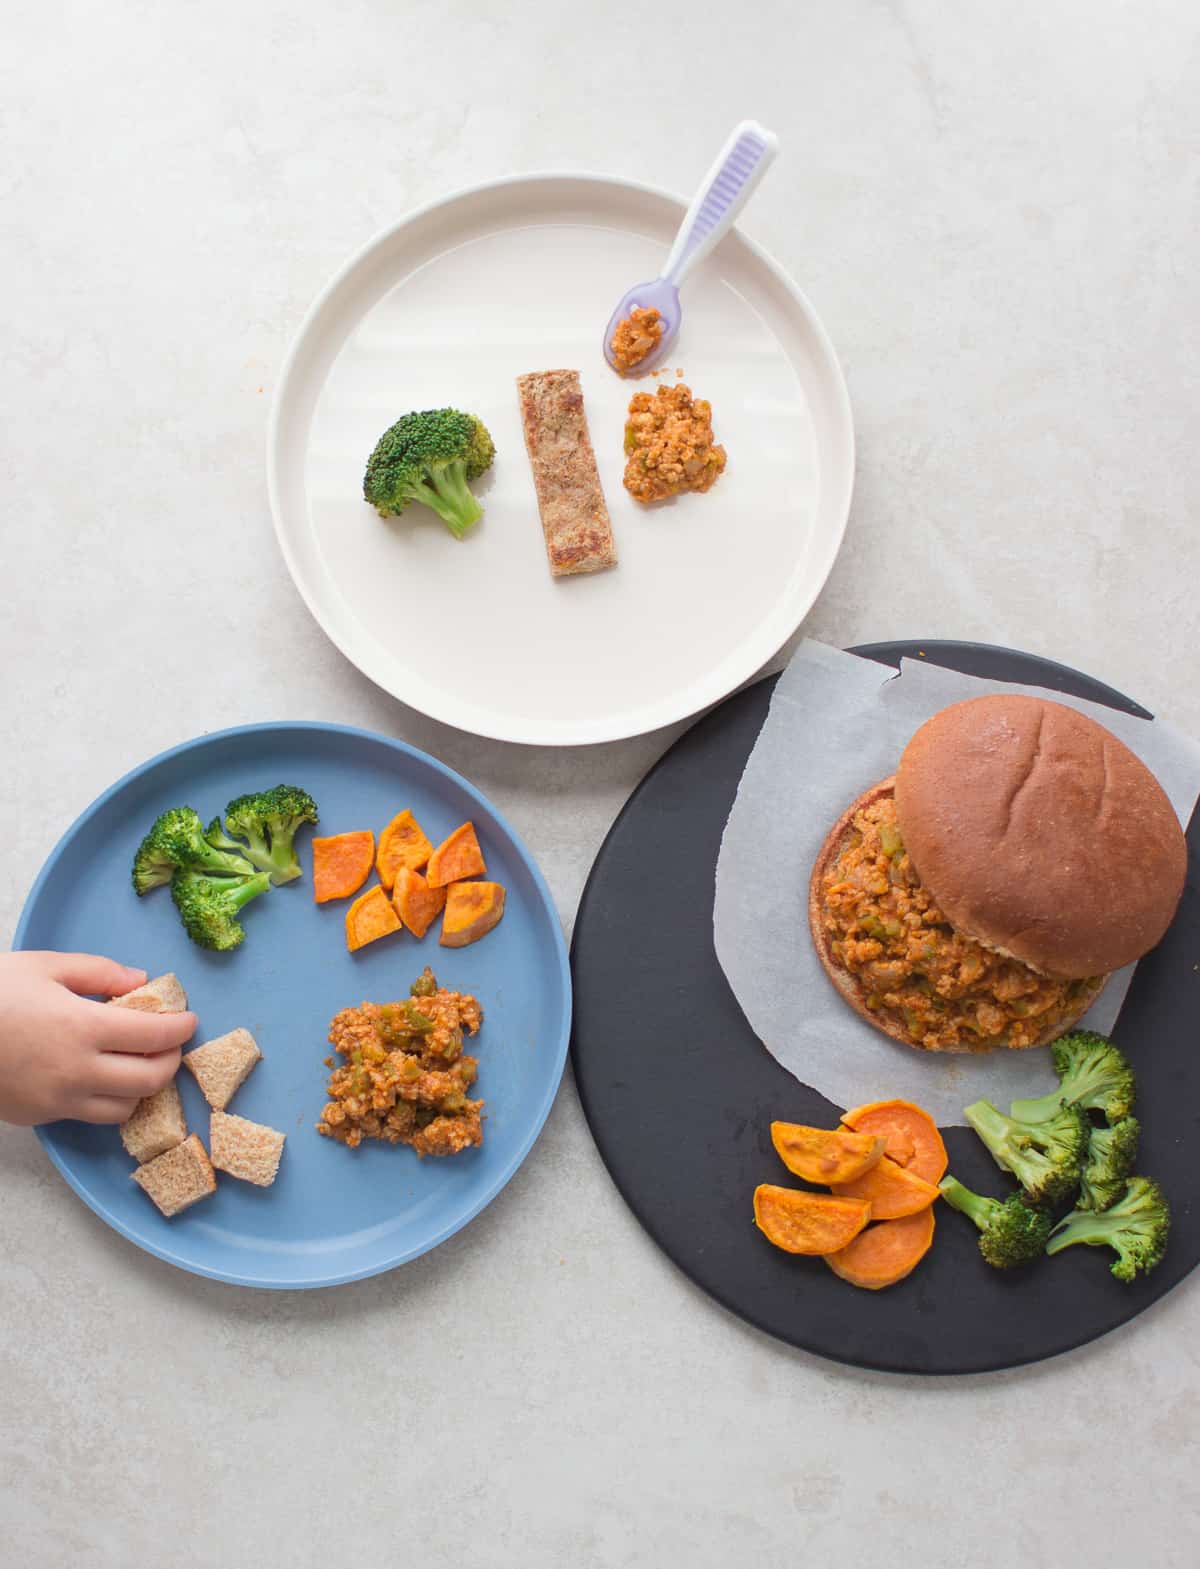 Turkey Sloppy Joes plated three ways - for an adult, toddler, and baby.